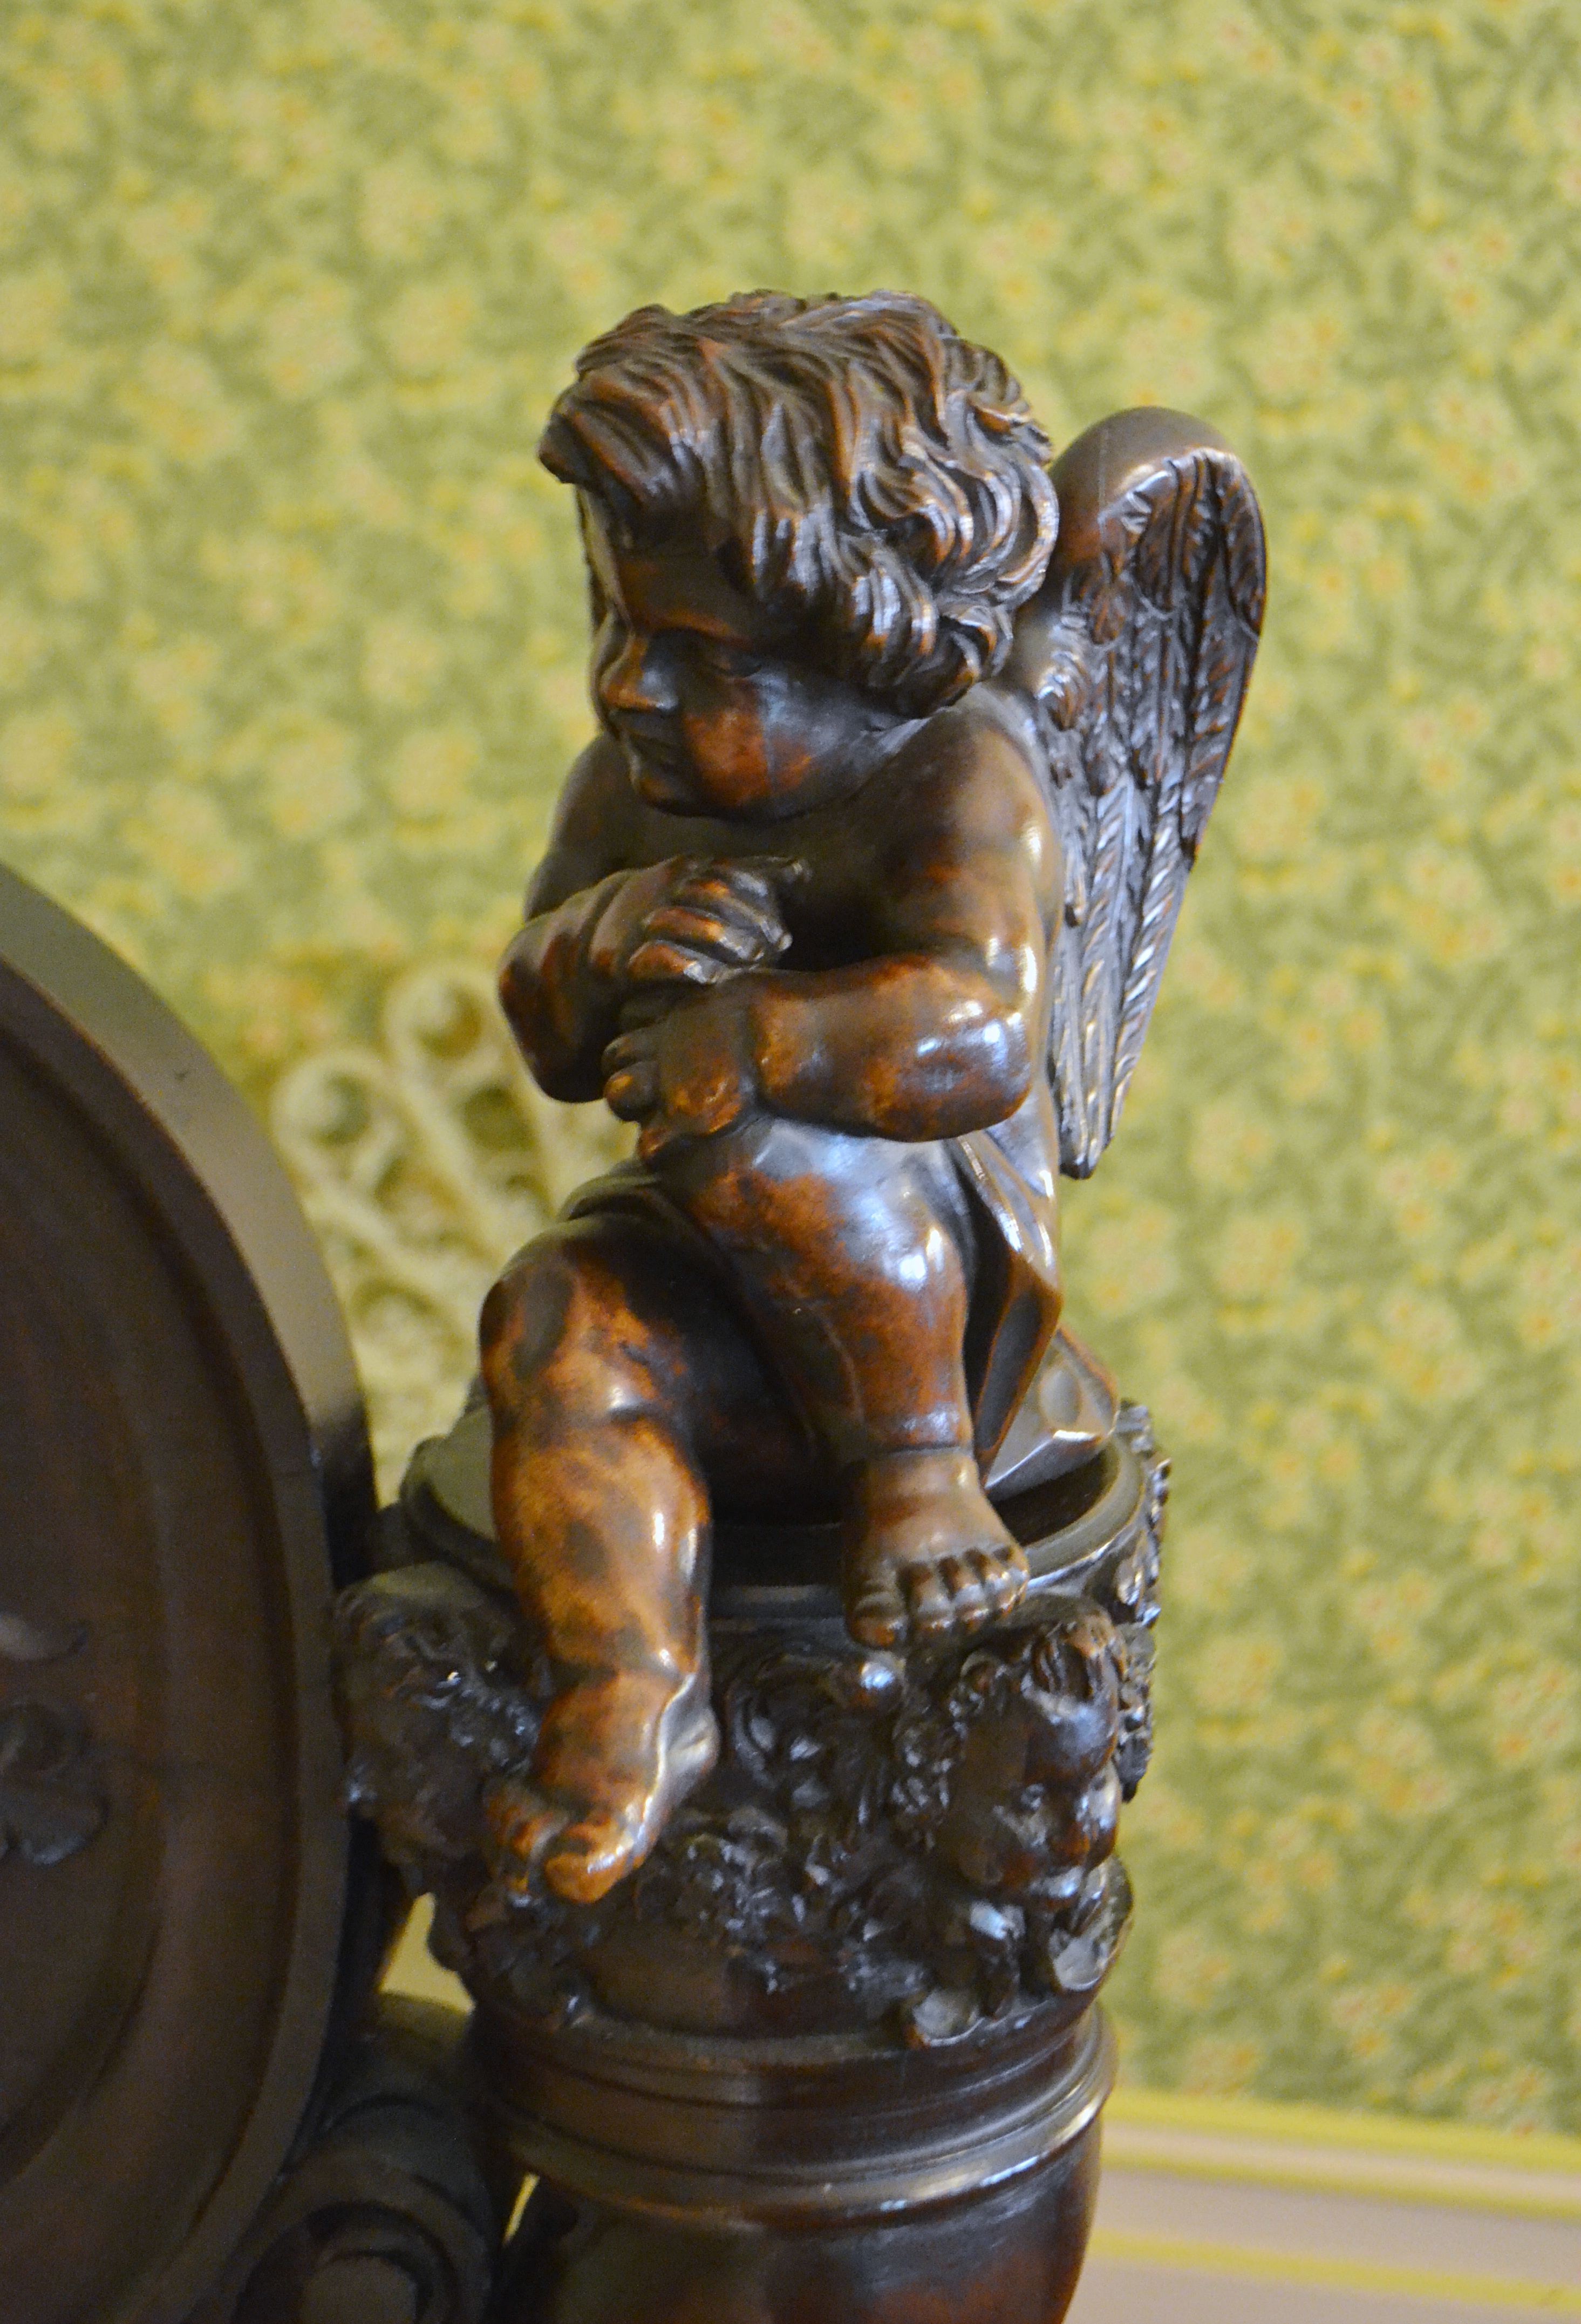 The angels on the corner of the bed were removable, making them ideal playthings for the Clemens daughters. 